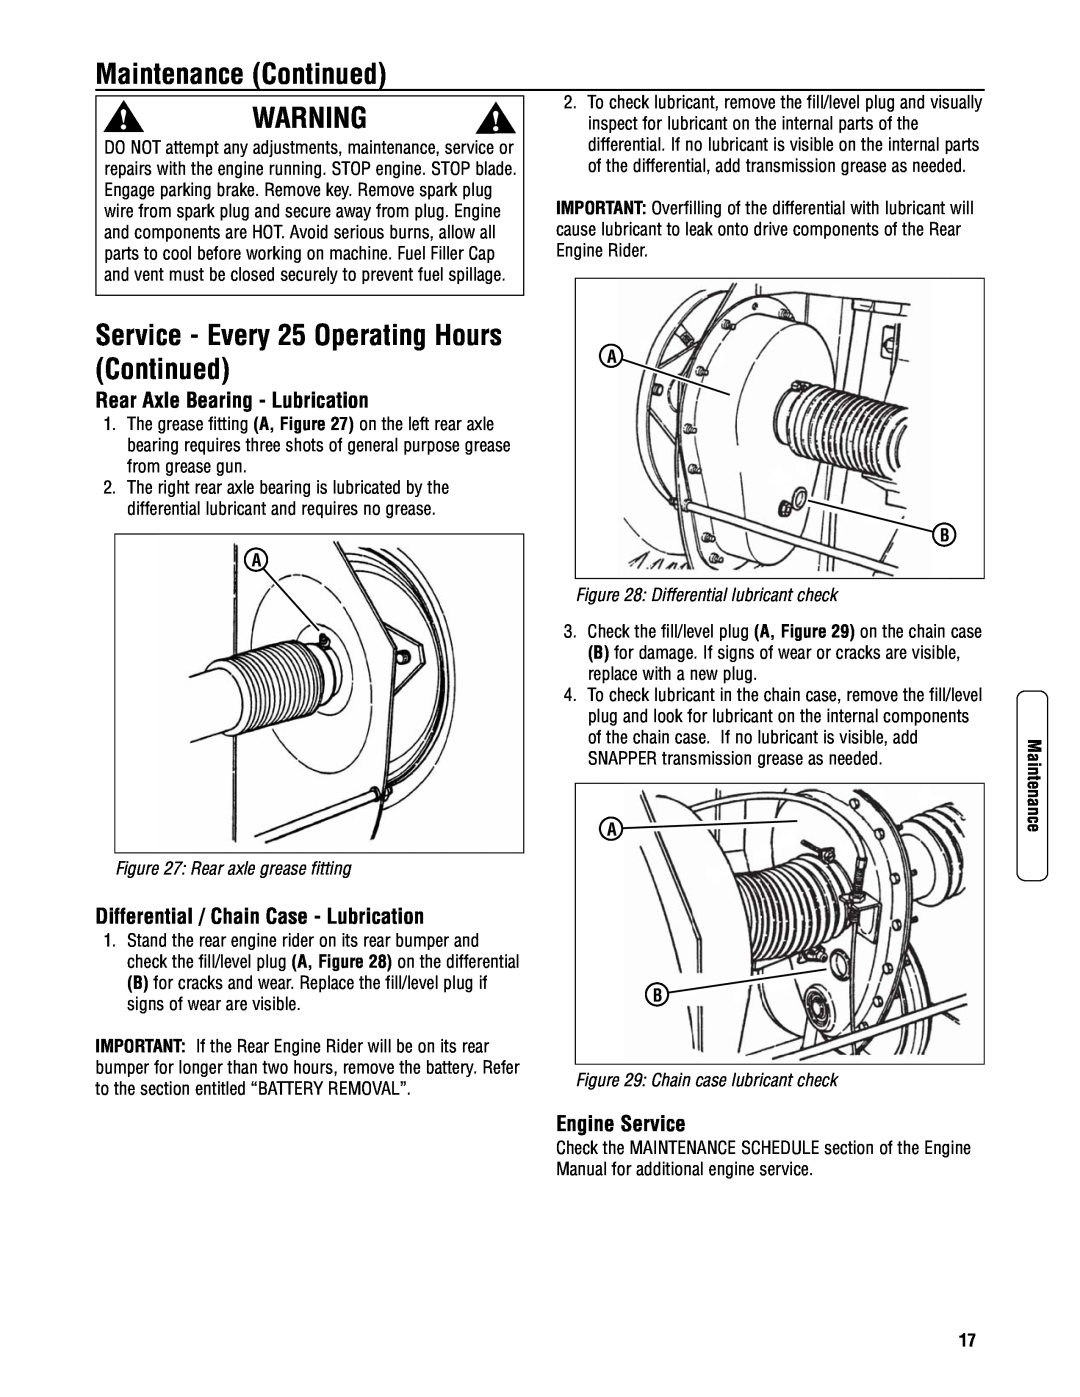 Snapper 3317523BVE Service - Every 25 Operating Hours, Rear Axle Bearing - Lubrication, Engine Service, Continued 